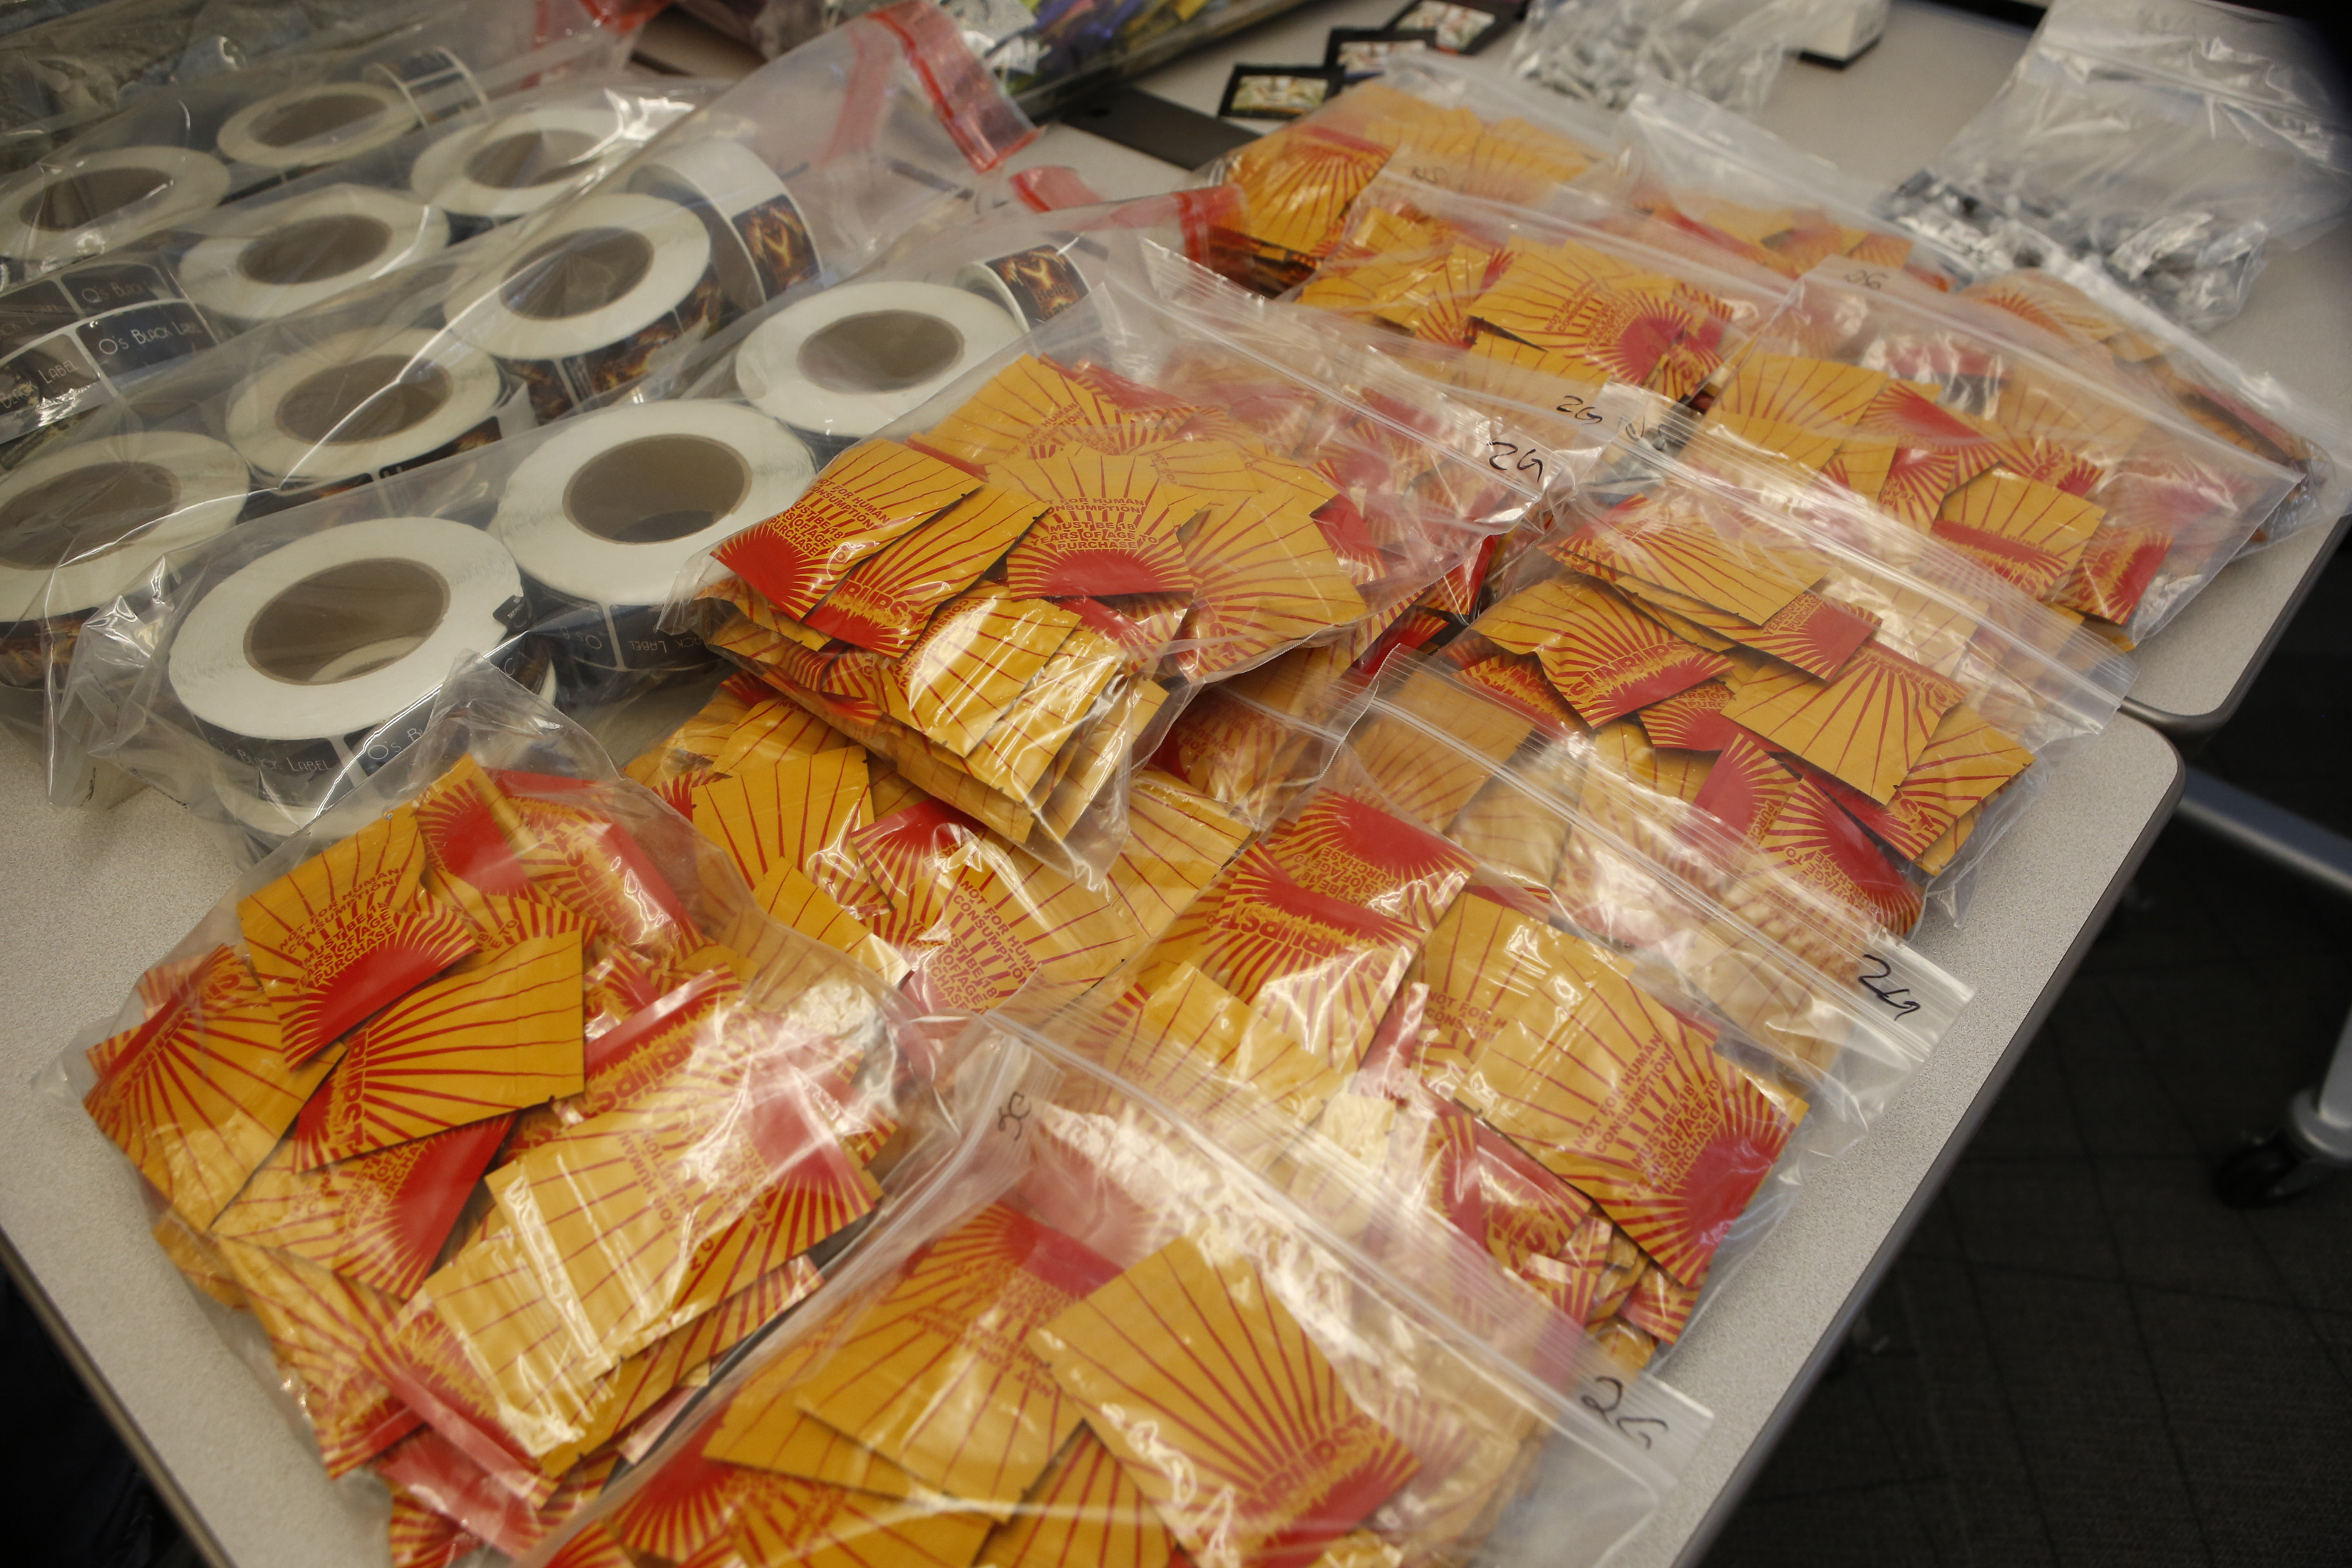 D.C.’s attorney general targets sellers of synthetic drugs